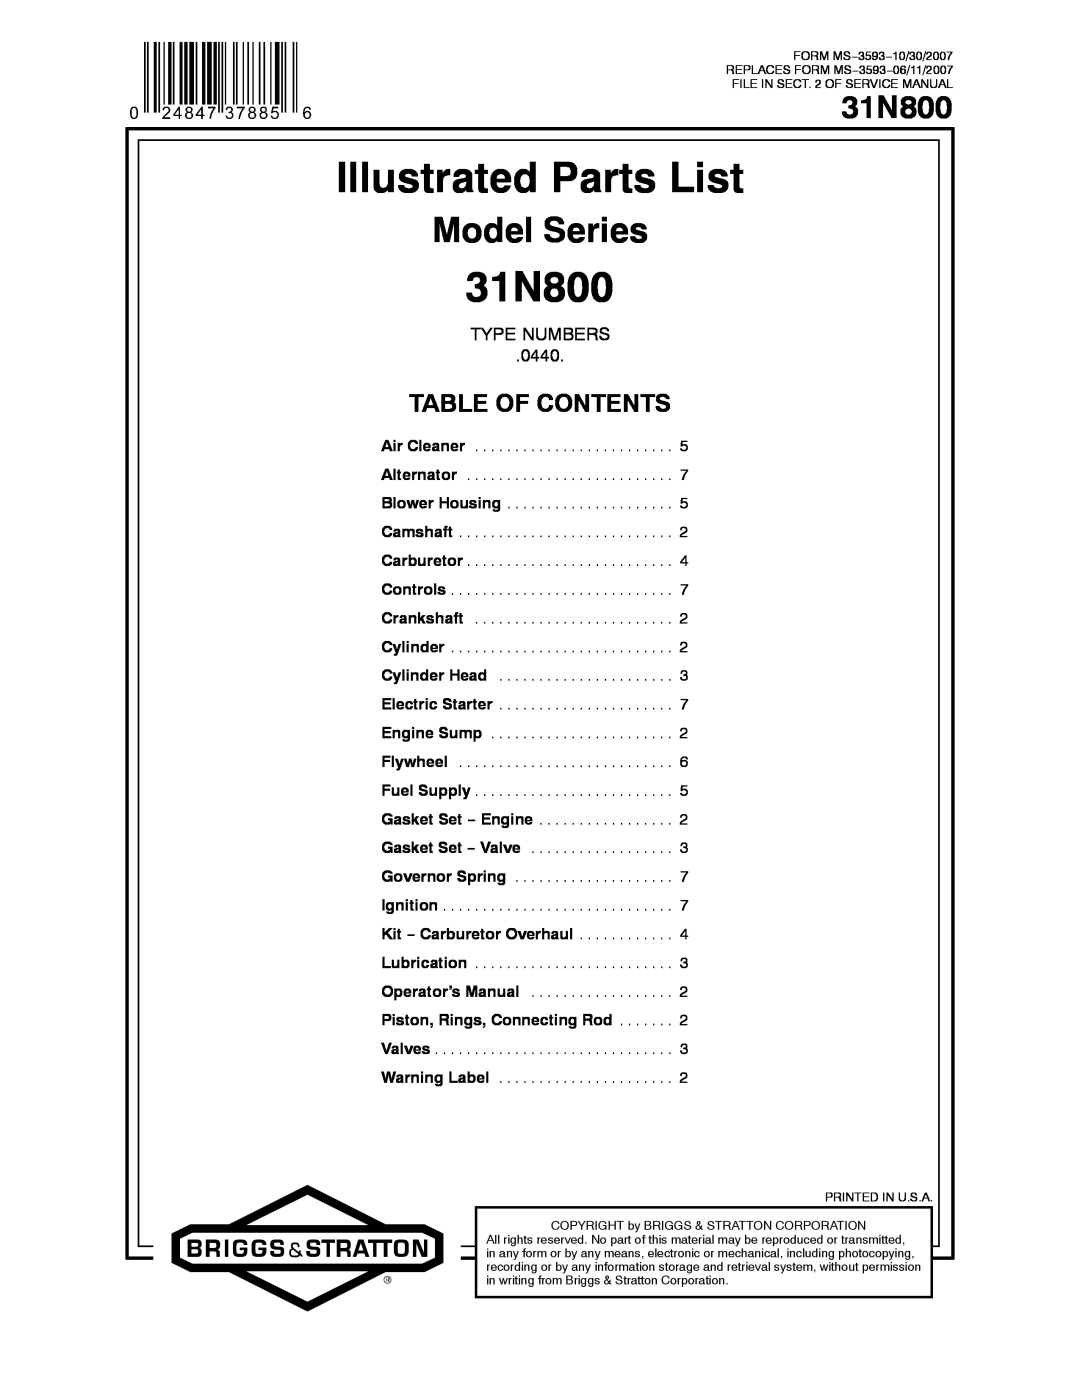 Briggs & Stratton 31N800 service manual Illustrated Parts List, Model Series, Table Of Contents, Type Numbers 